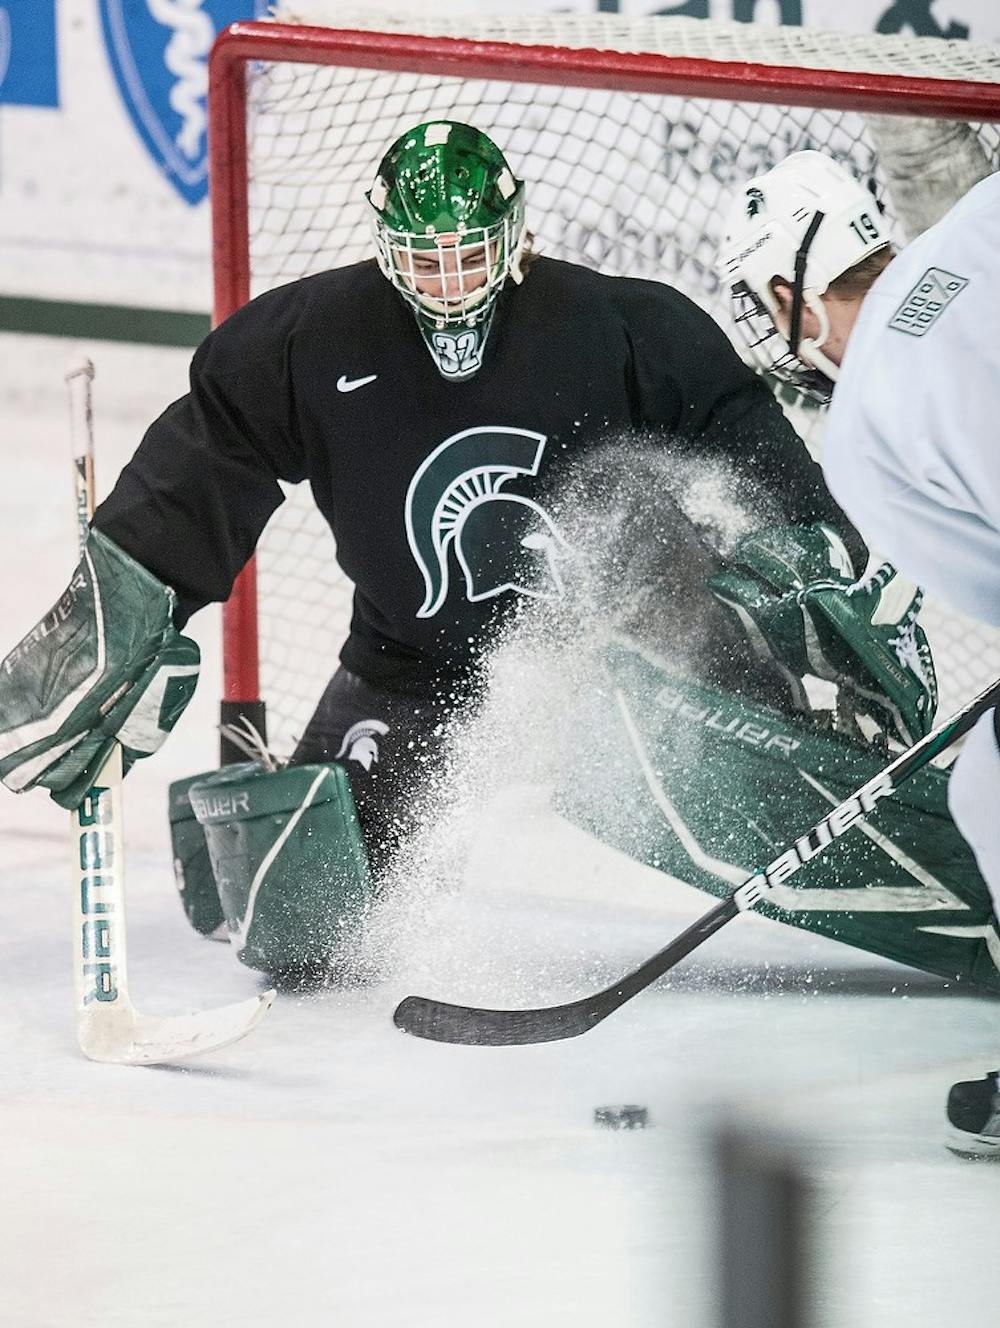 	<p>Sophomore goaltender Nathan Phillips defends the net against teammate and freshman forward Matt DeBlouw&#8217;s goal attempt during a skills competition portion of hockey practice Feb. 11, 2013, at Munn Ice Arena. The skills competition pitted <span class="caps">MSU</span> players against one another in slap shots, accuracy and puck speed. Danyelle Morrow/The State News</p>